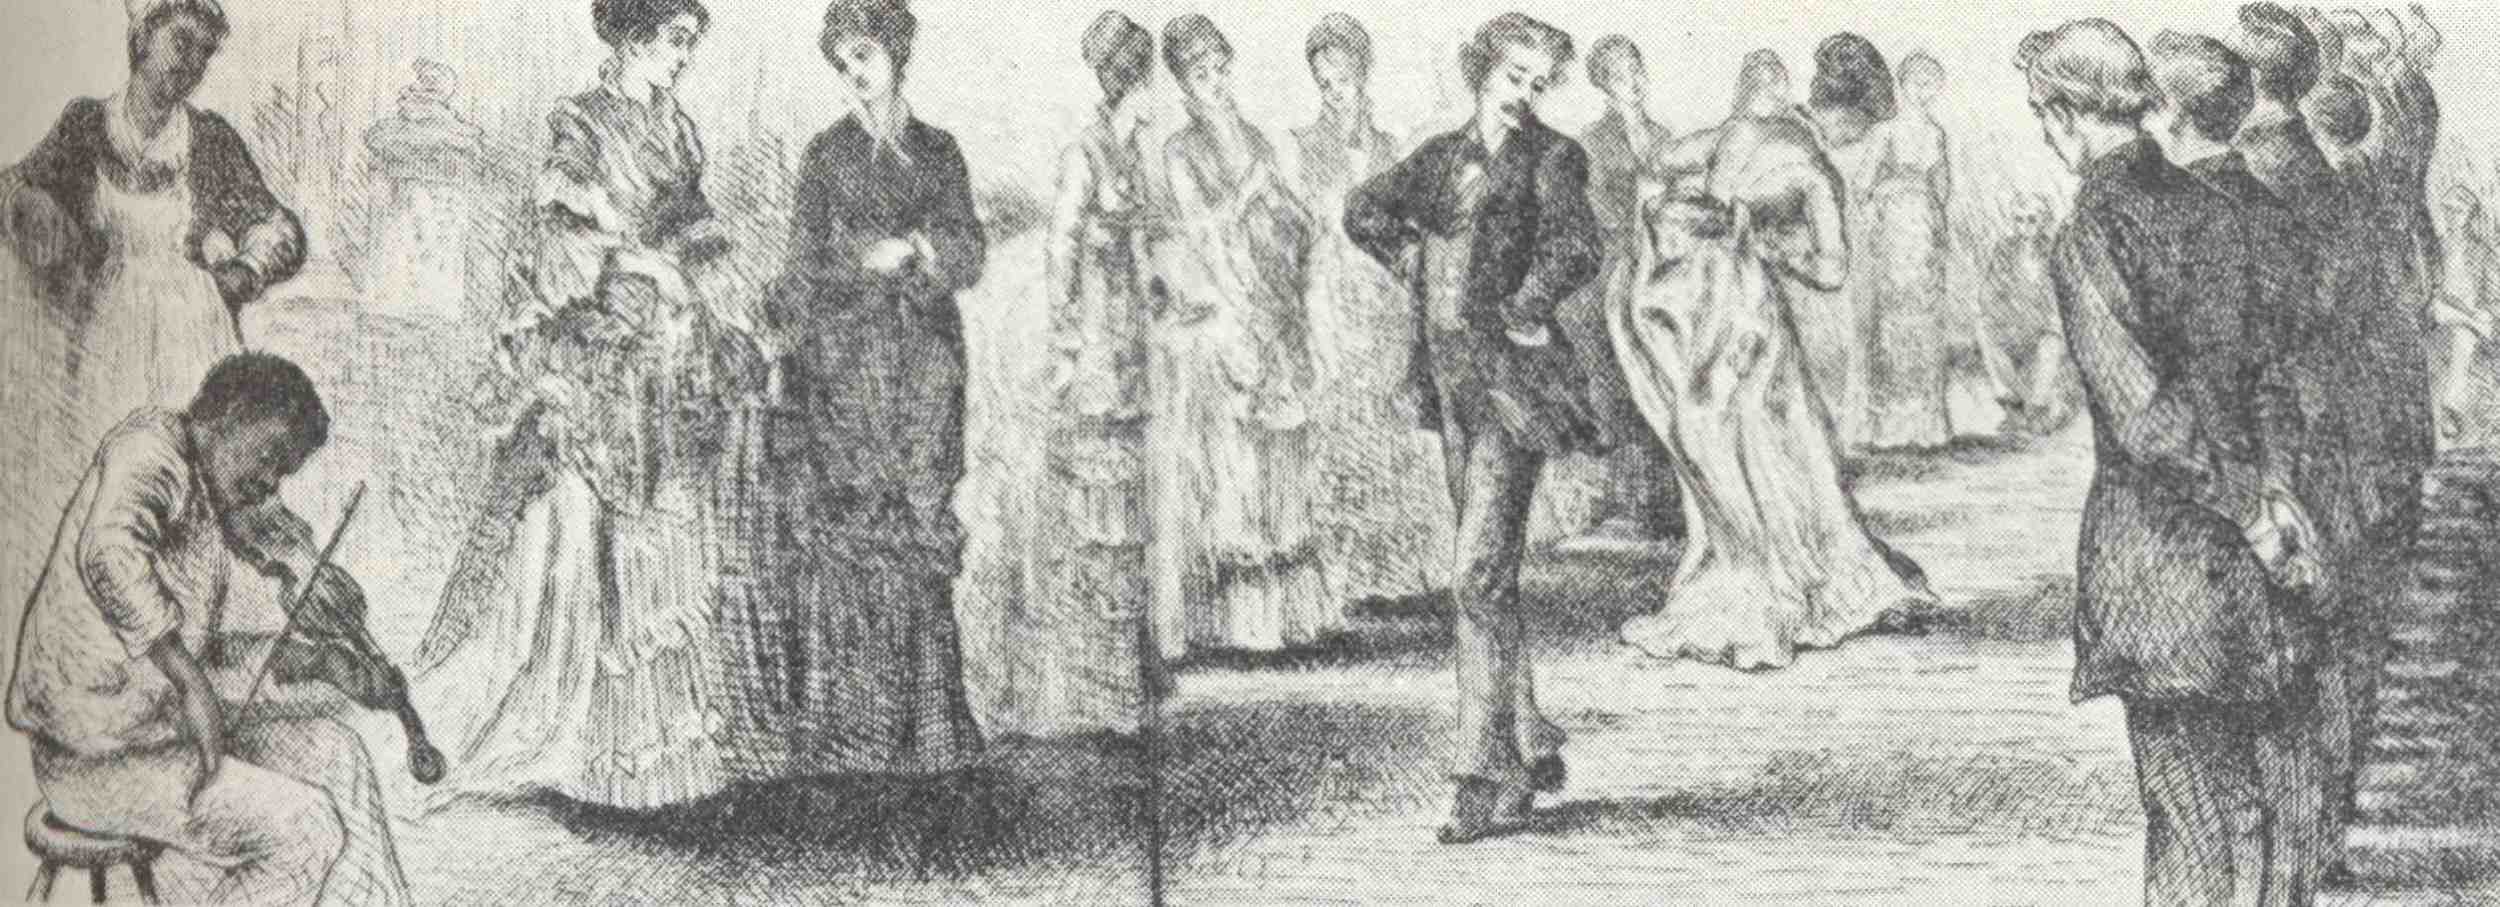  "The Virginia Reel" ( Harper’s Weekly , 1875) Black fiddler provides music for a Virginia Reel at an antebellum ball in the 1850s 